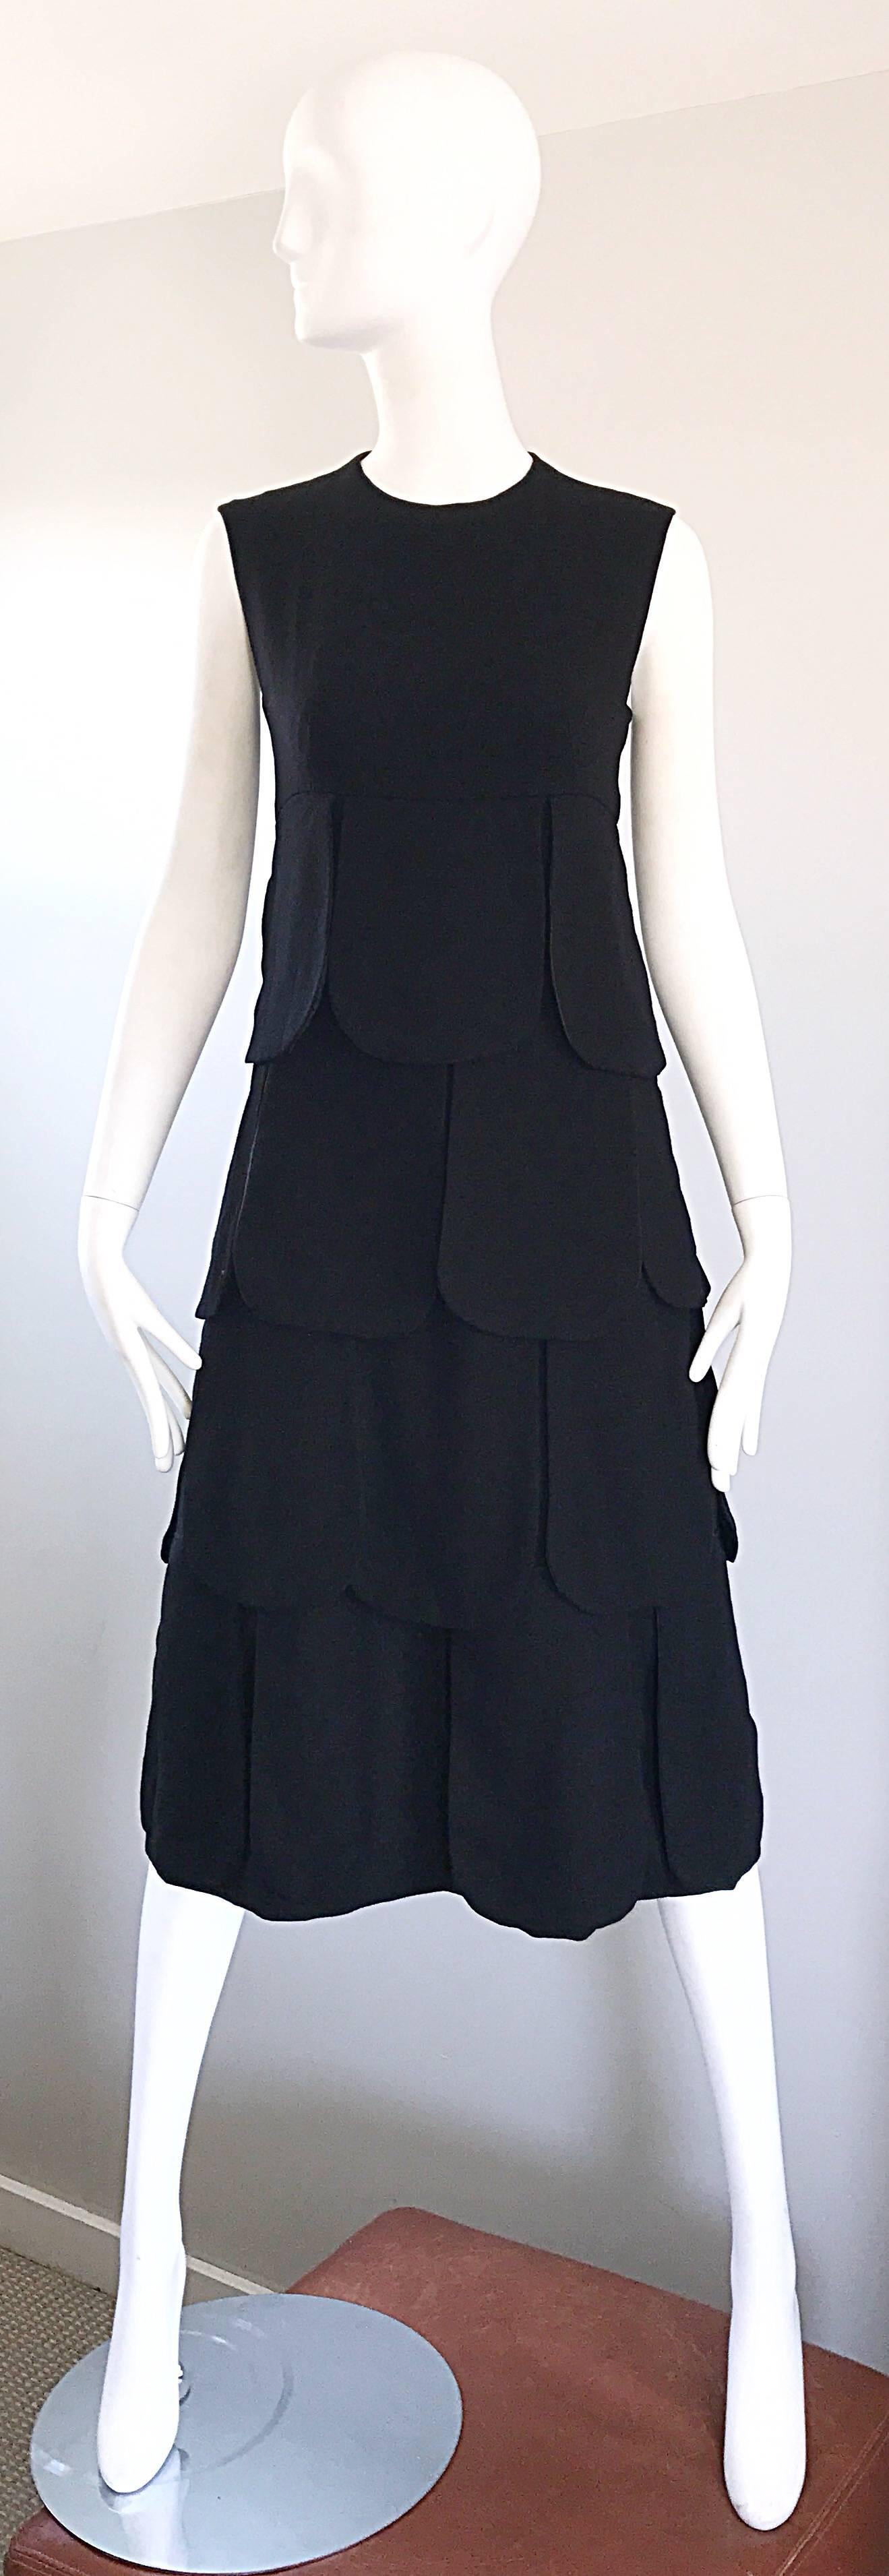 Rare and Iconic 1960s PIERRE CARDIN Haute Couture black Space Age midi dress! Features panels of lined black wool that look amazing with movement! Fitted bodice with a flattering A-Line skirt. Full metal zipper up the back with hook-and-eye closure.